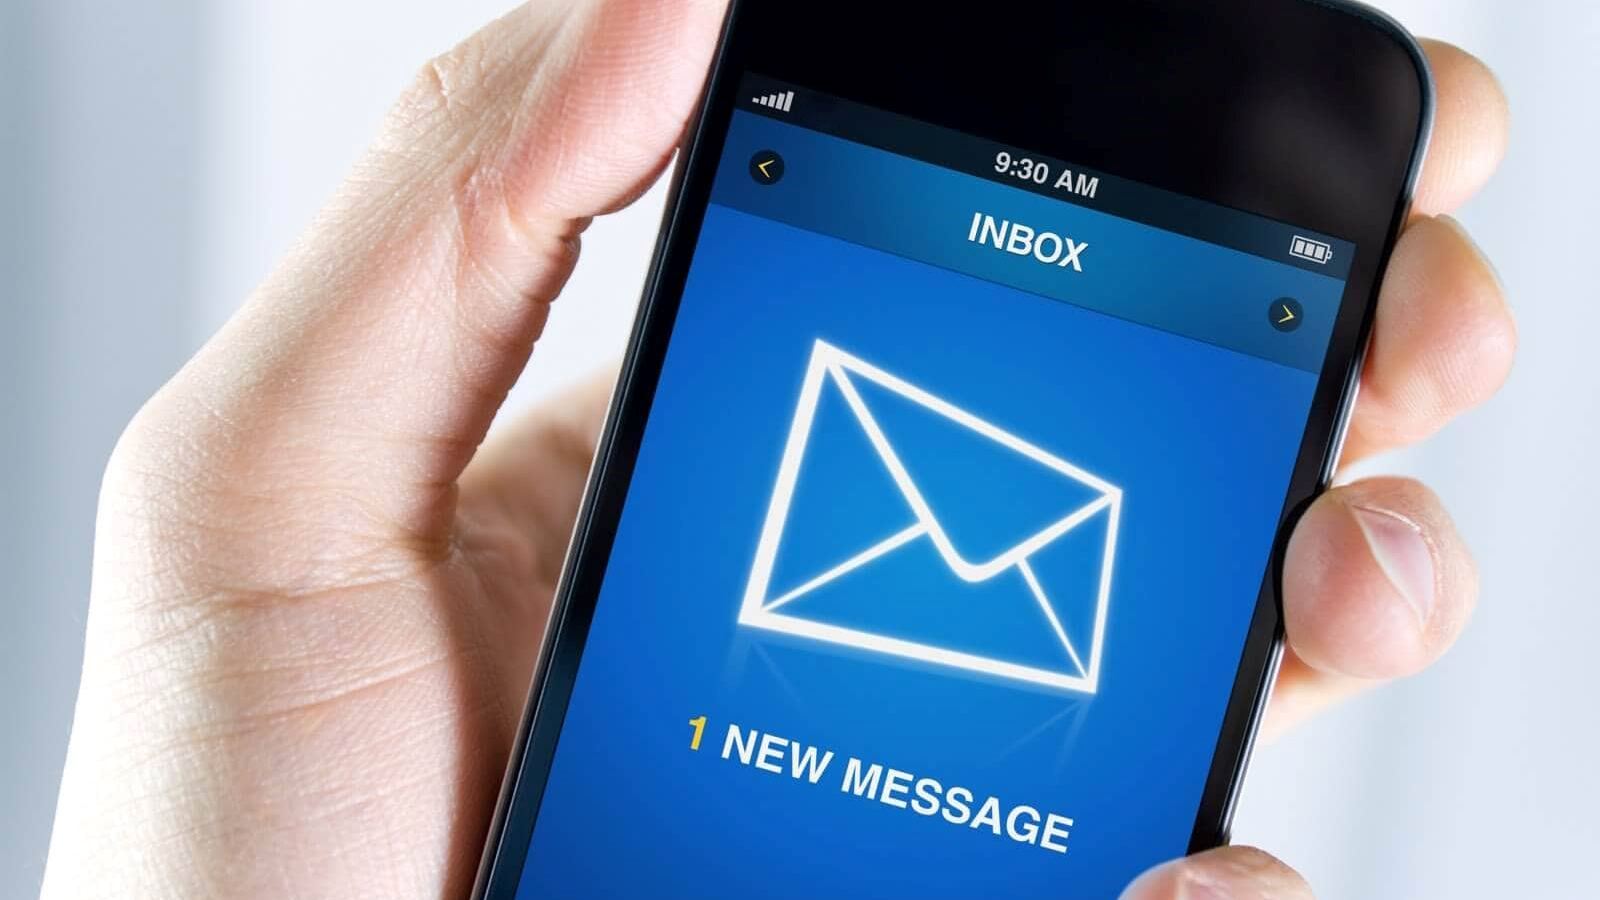 Hand holding a smartphone showing inbox with one new message